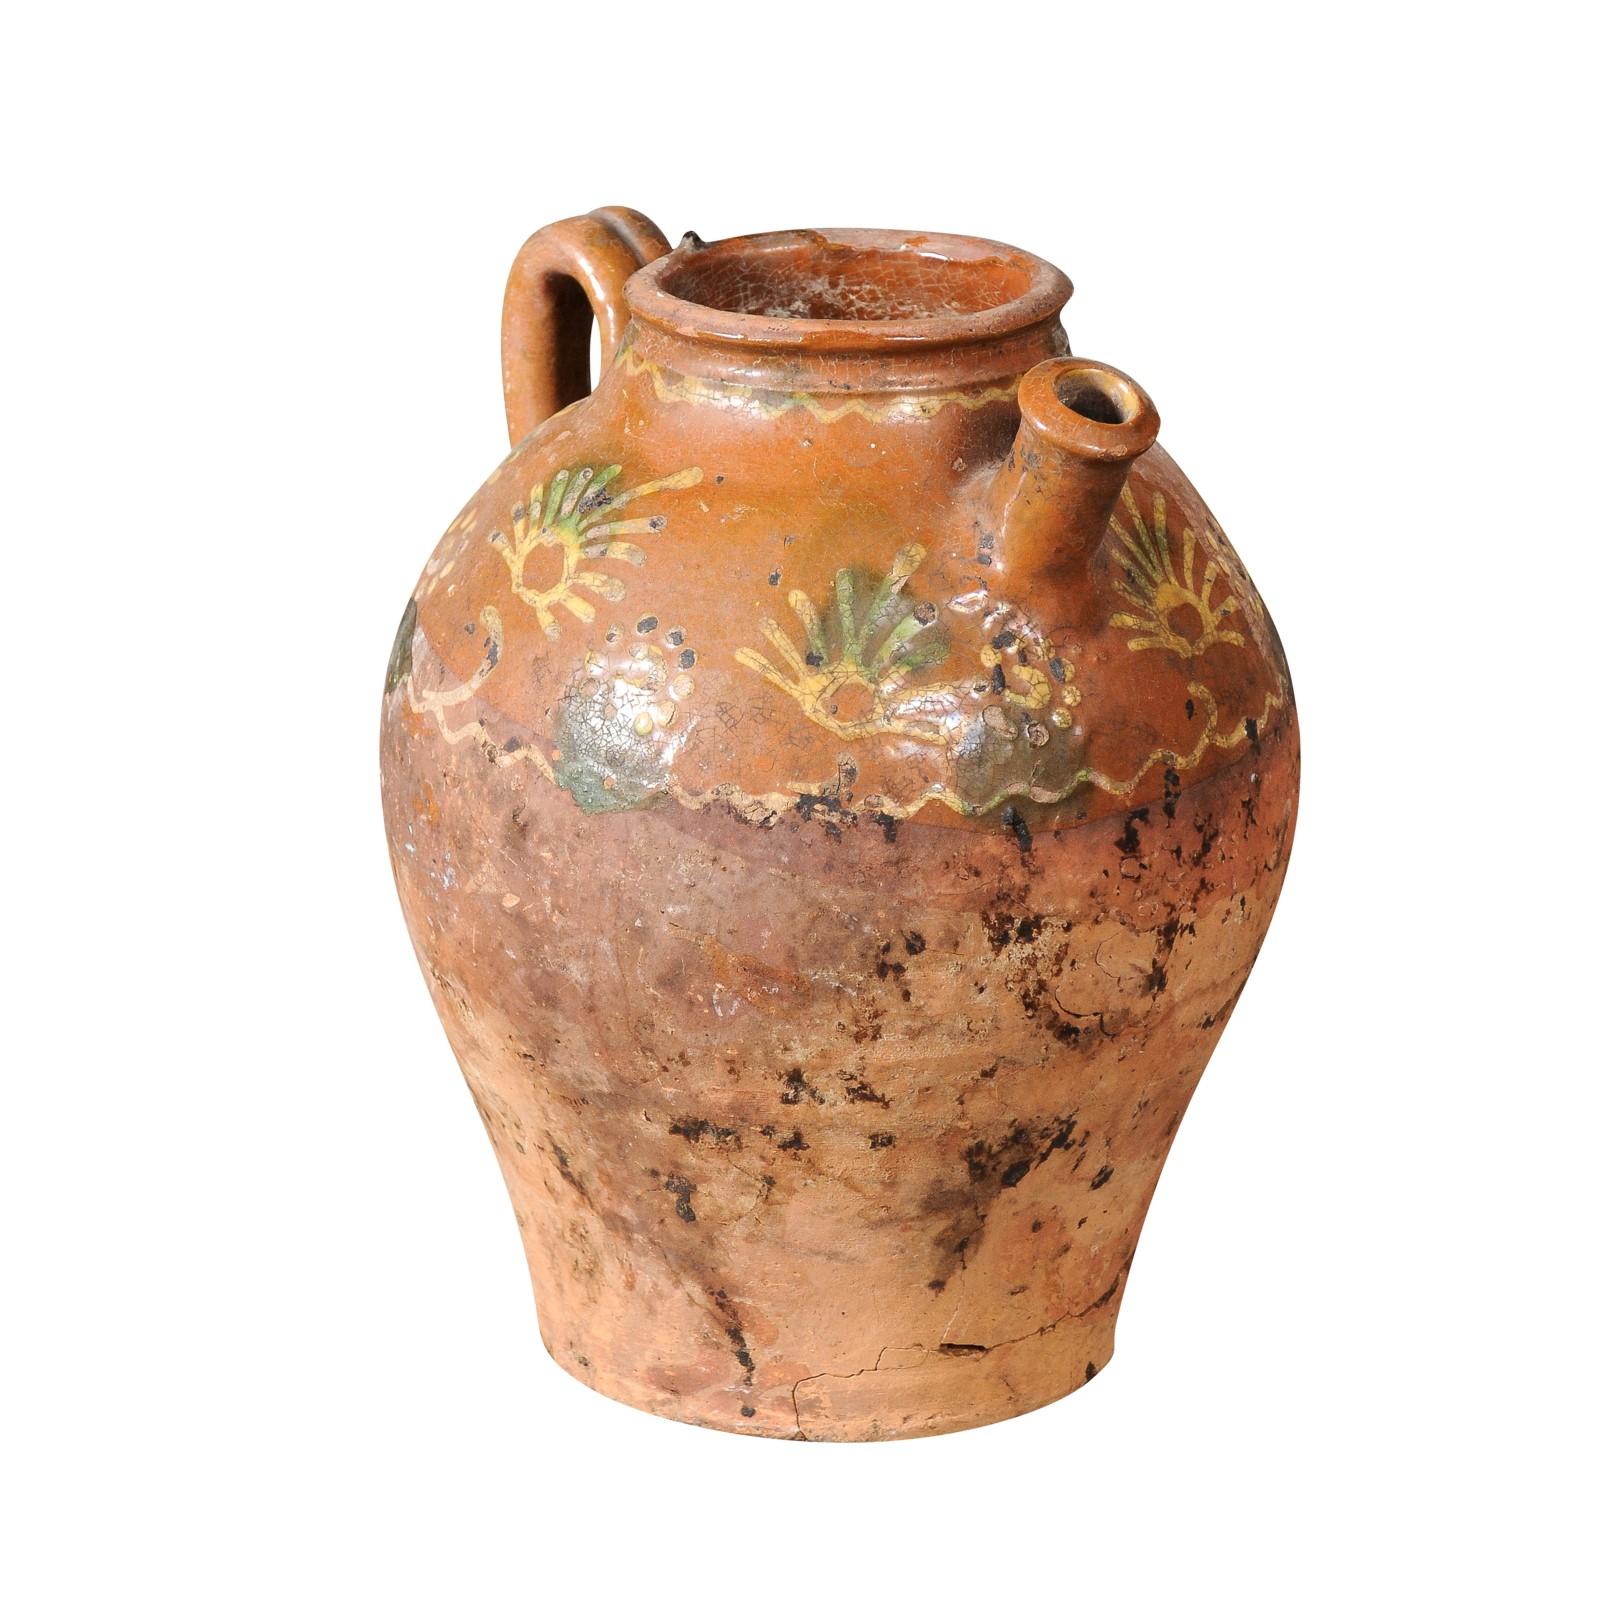 French Bressane pottery jug from the 19th century with brown glaze and soft yellow motifs. A charming French Bressane pottery jug from the 19th century, enveloped in a brown glaze adorned with soft yellow motifs, melding rustic character with an